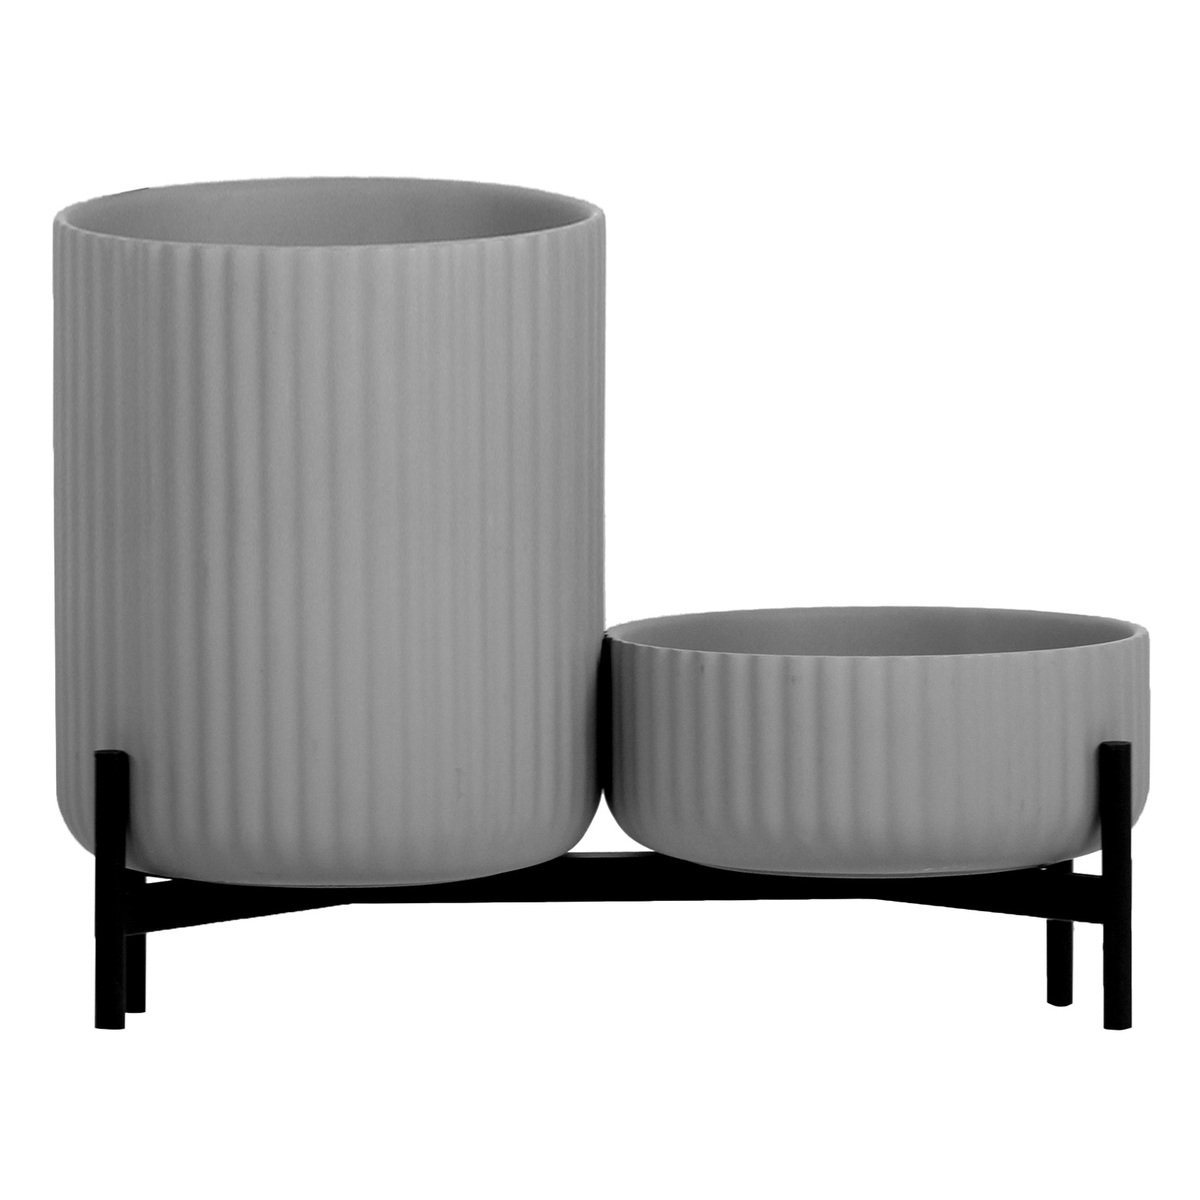 Elementa Klorofyll planter with stand, low and high, grey | Finnish Design  Shop NL